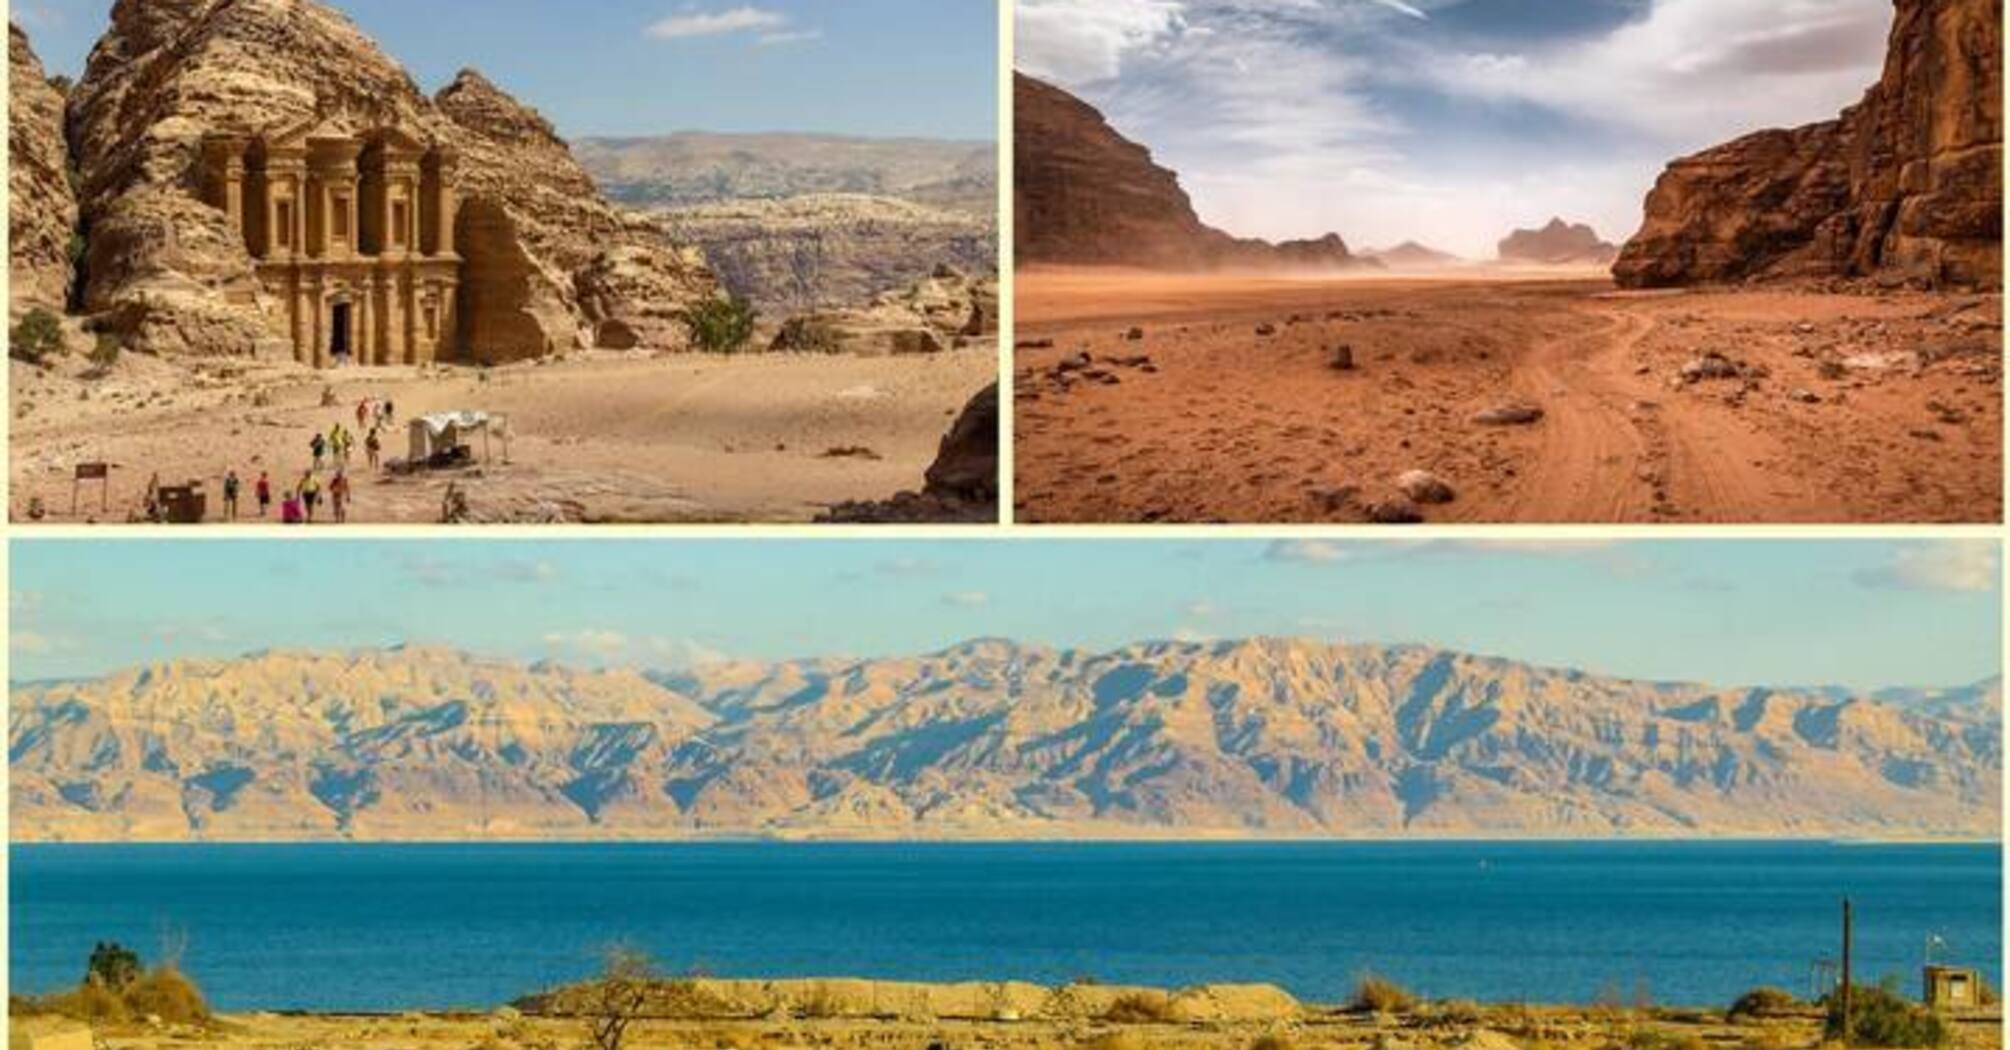 Ancient city of Madaba and floating in the Dead Sea: a 7-day guide to the landmarks of Jordan